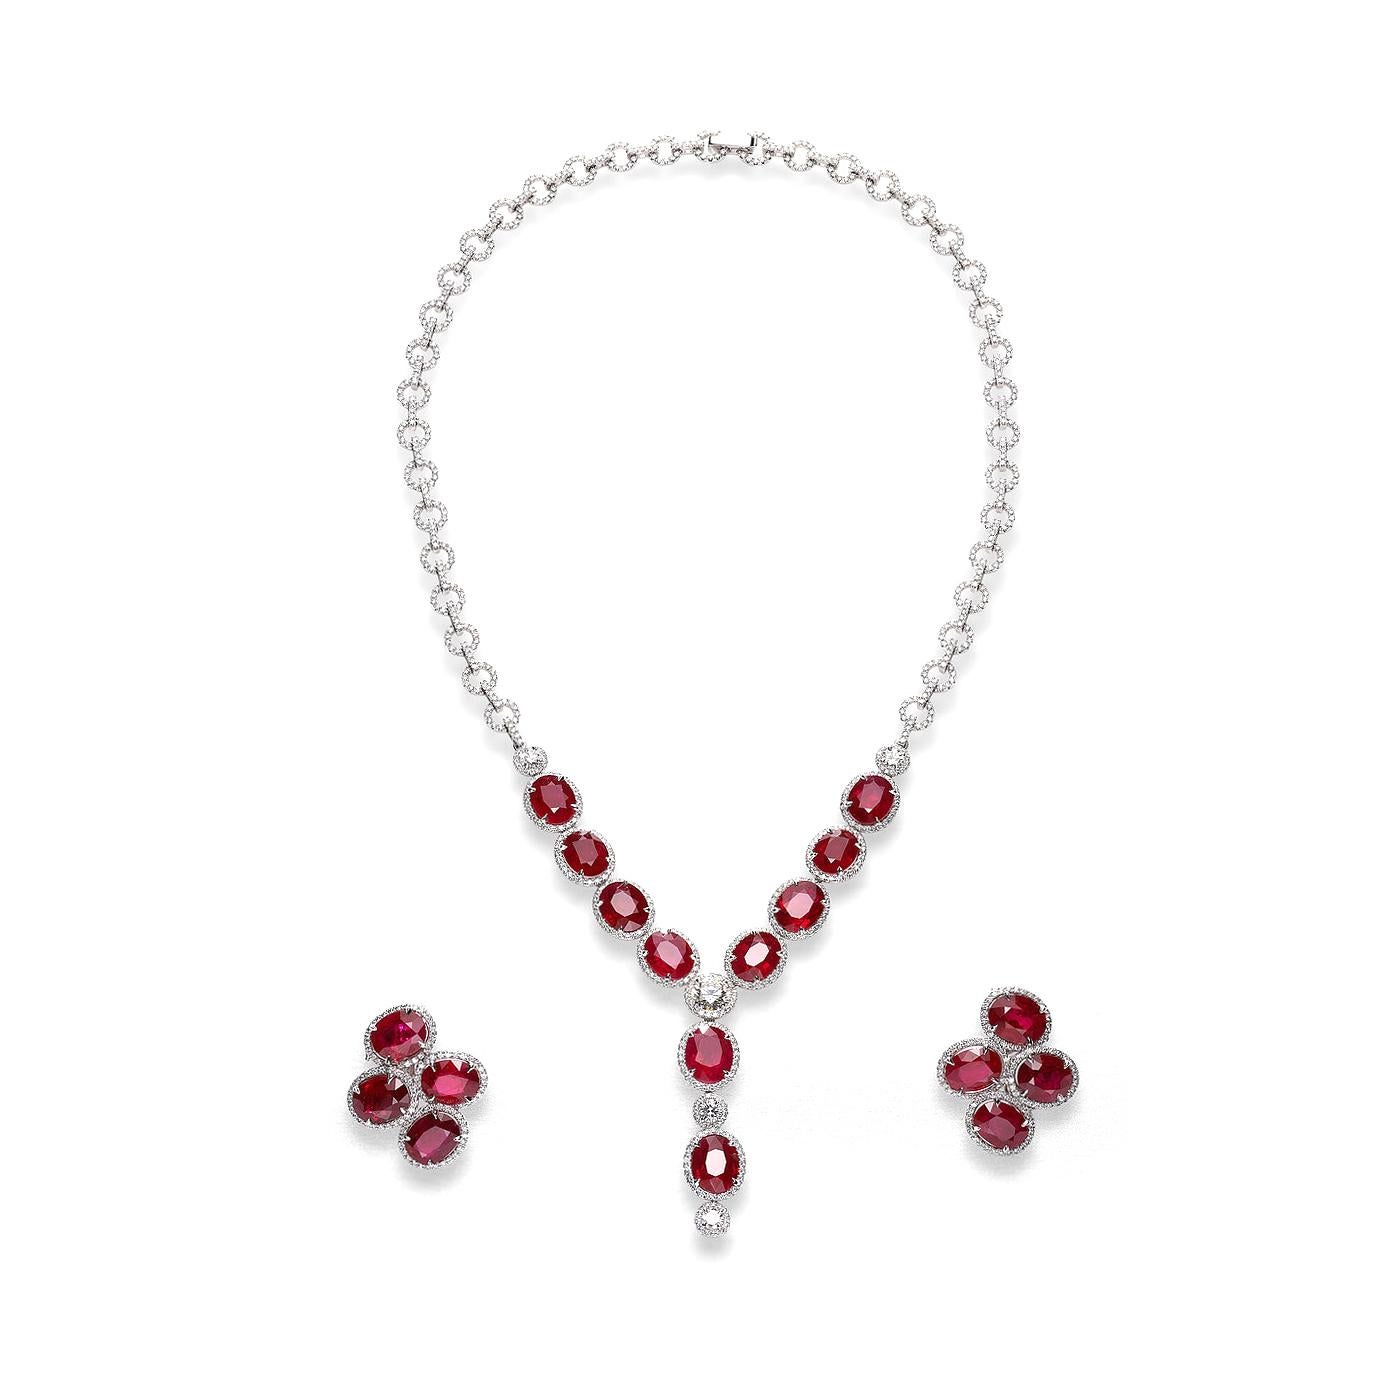 Necklace and earrings in 18kt white gold set with 2 oval cut rubies 0.53 ctss and 41 baguette cut diamonds 0.51 cts and 40 diamonds 0.28 cts